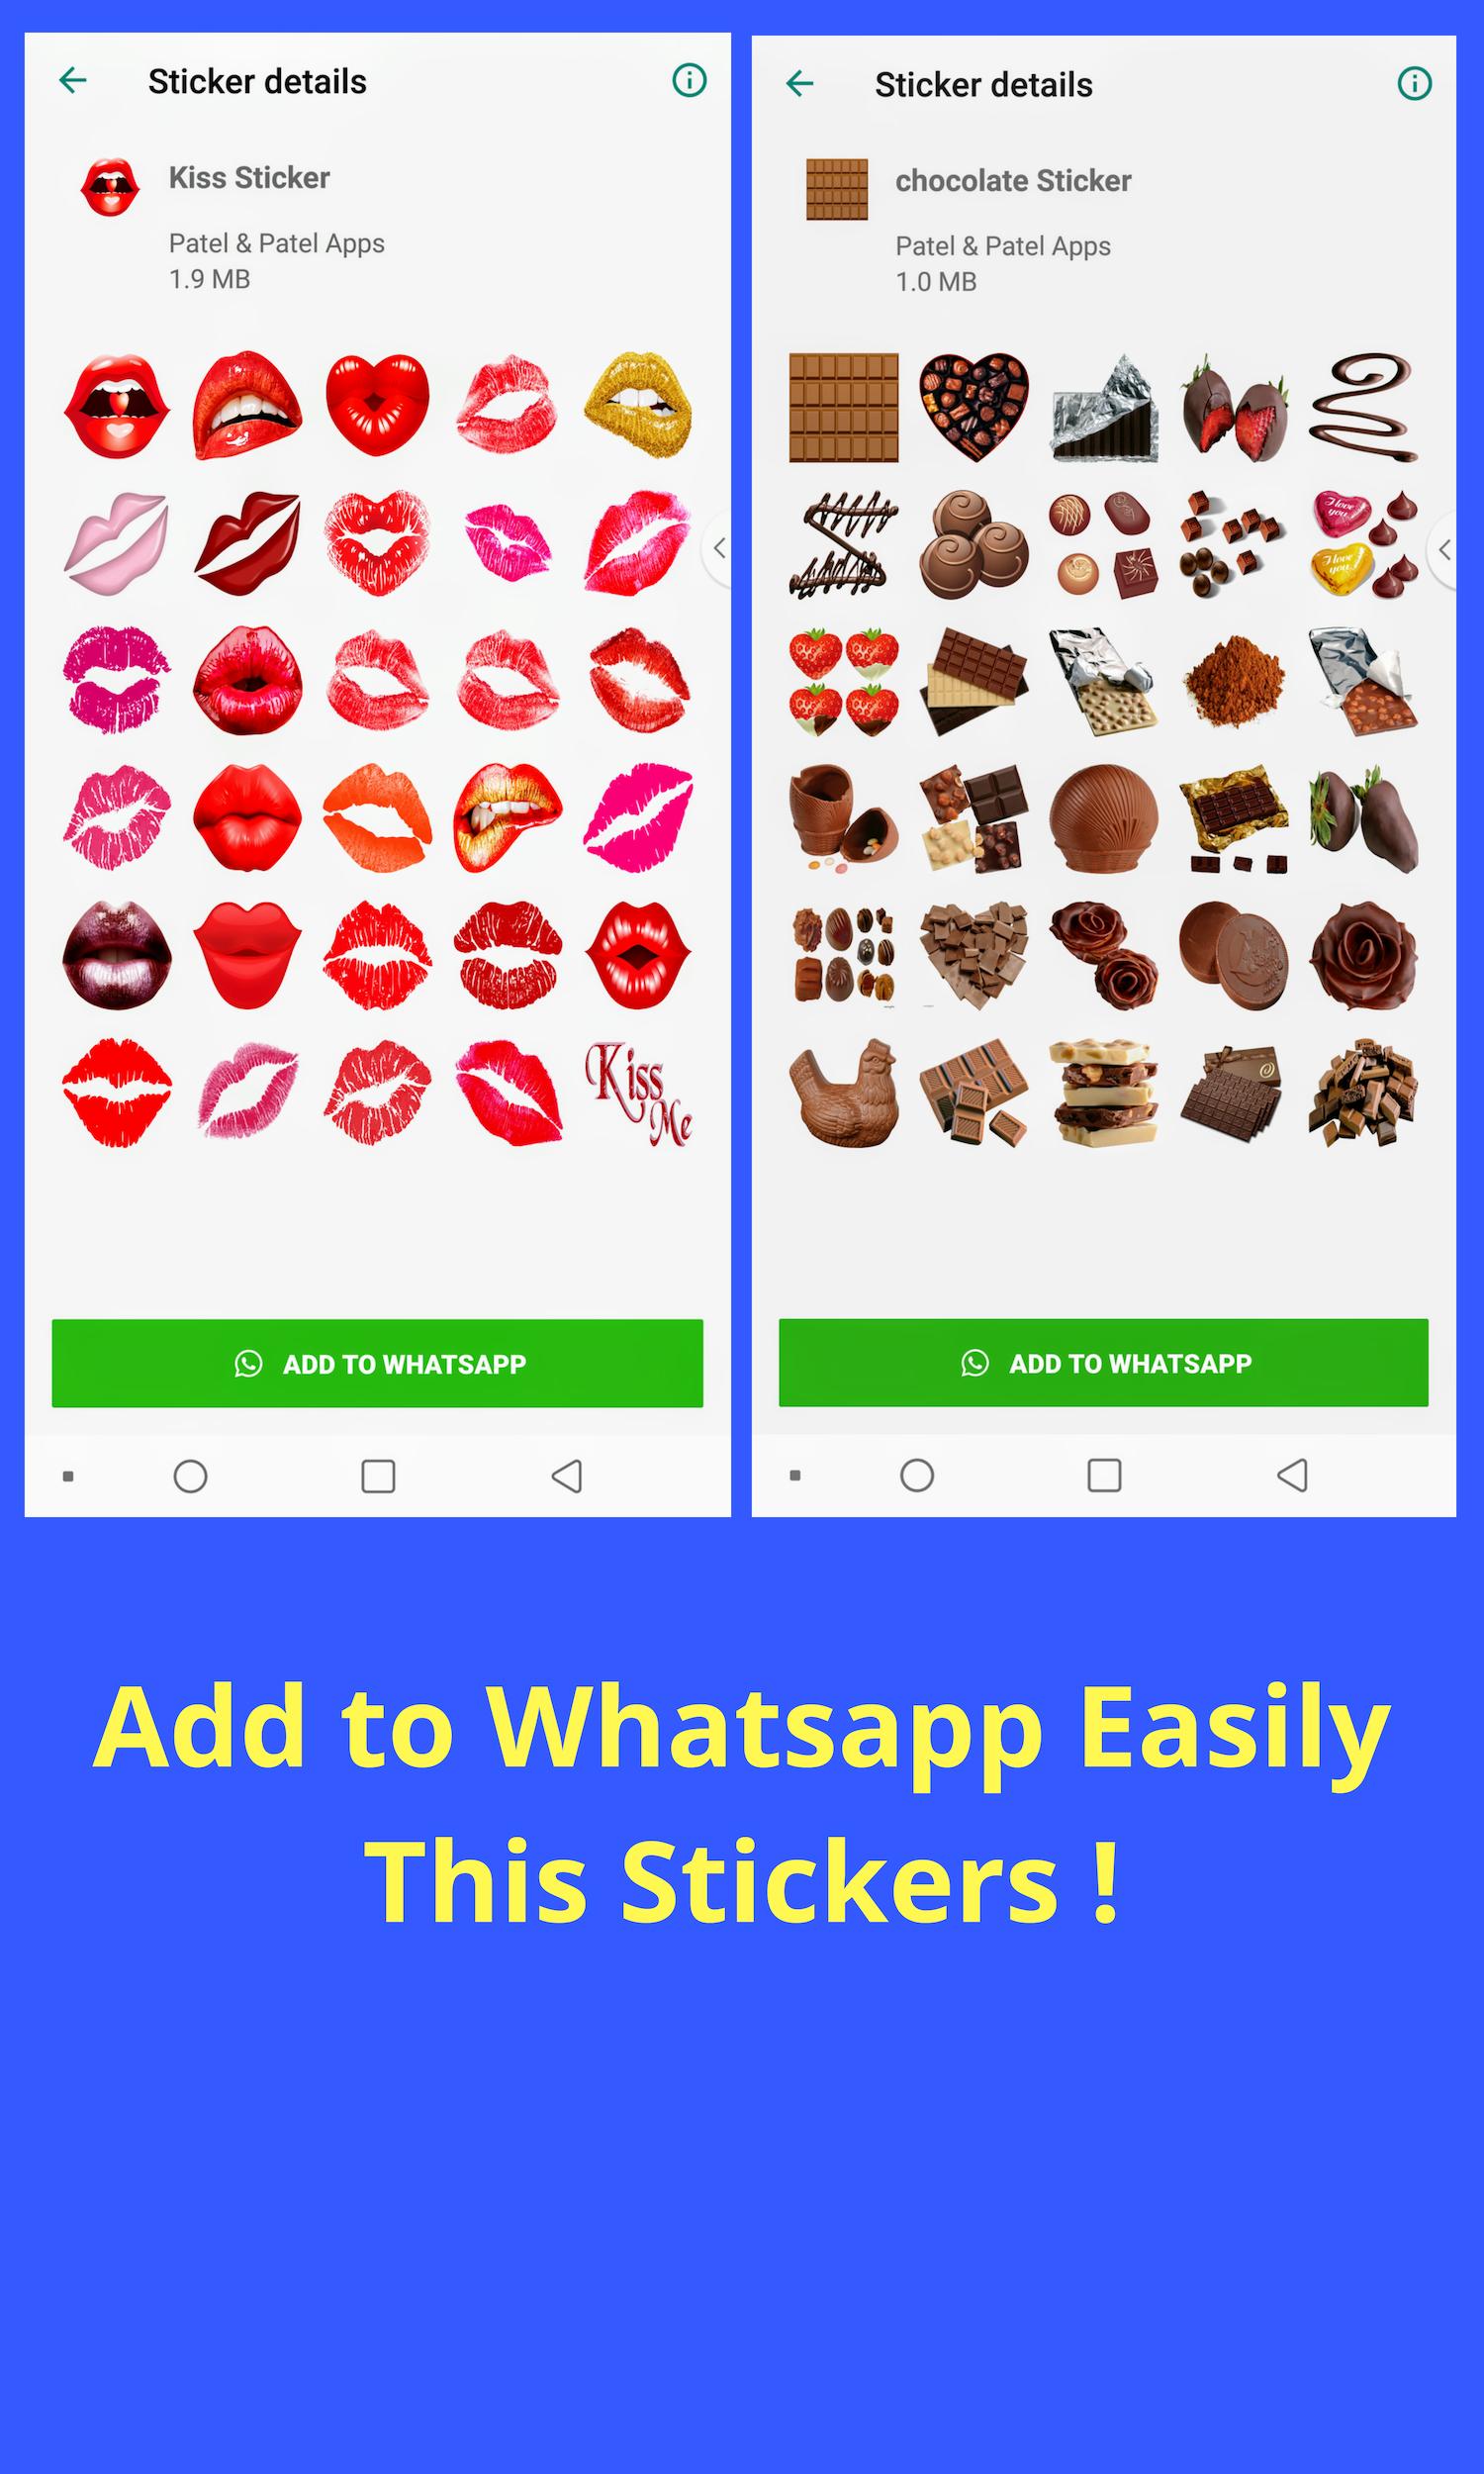 Xxx Valentines Love Stickers For Wa Sticker For Android Apk